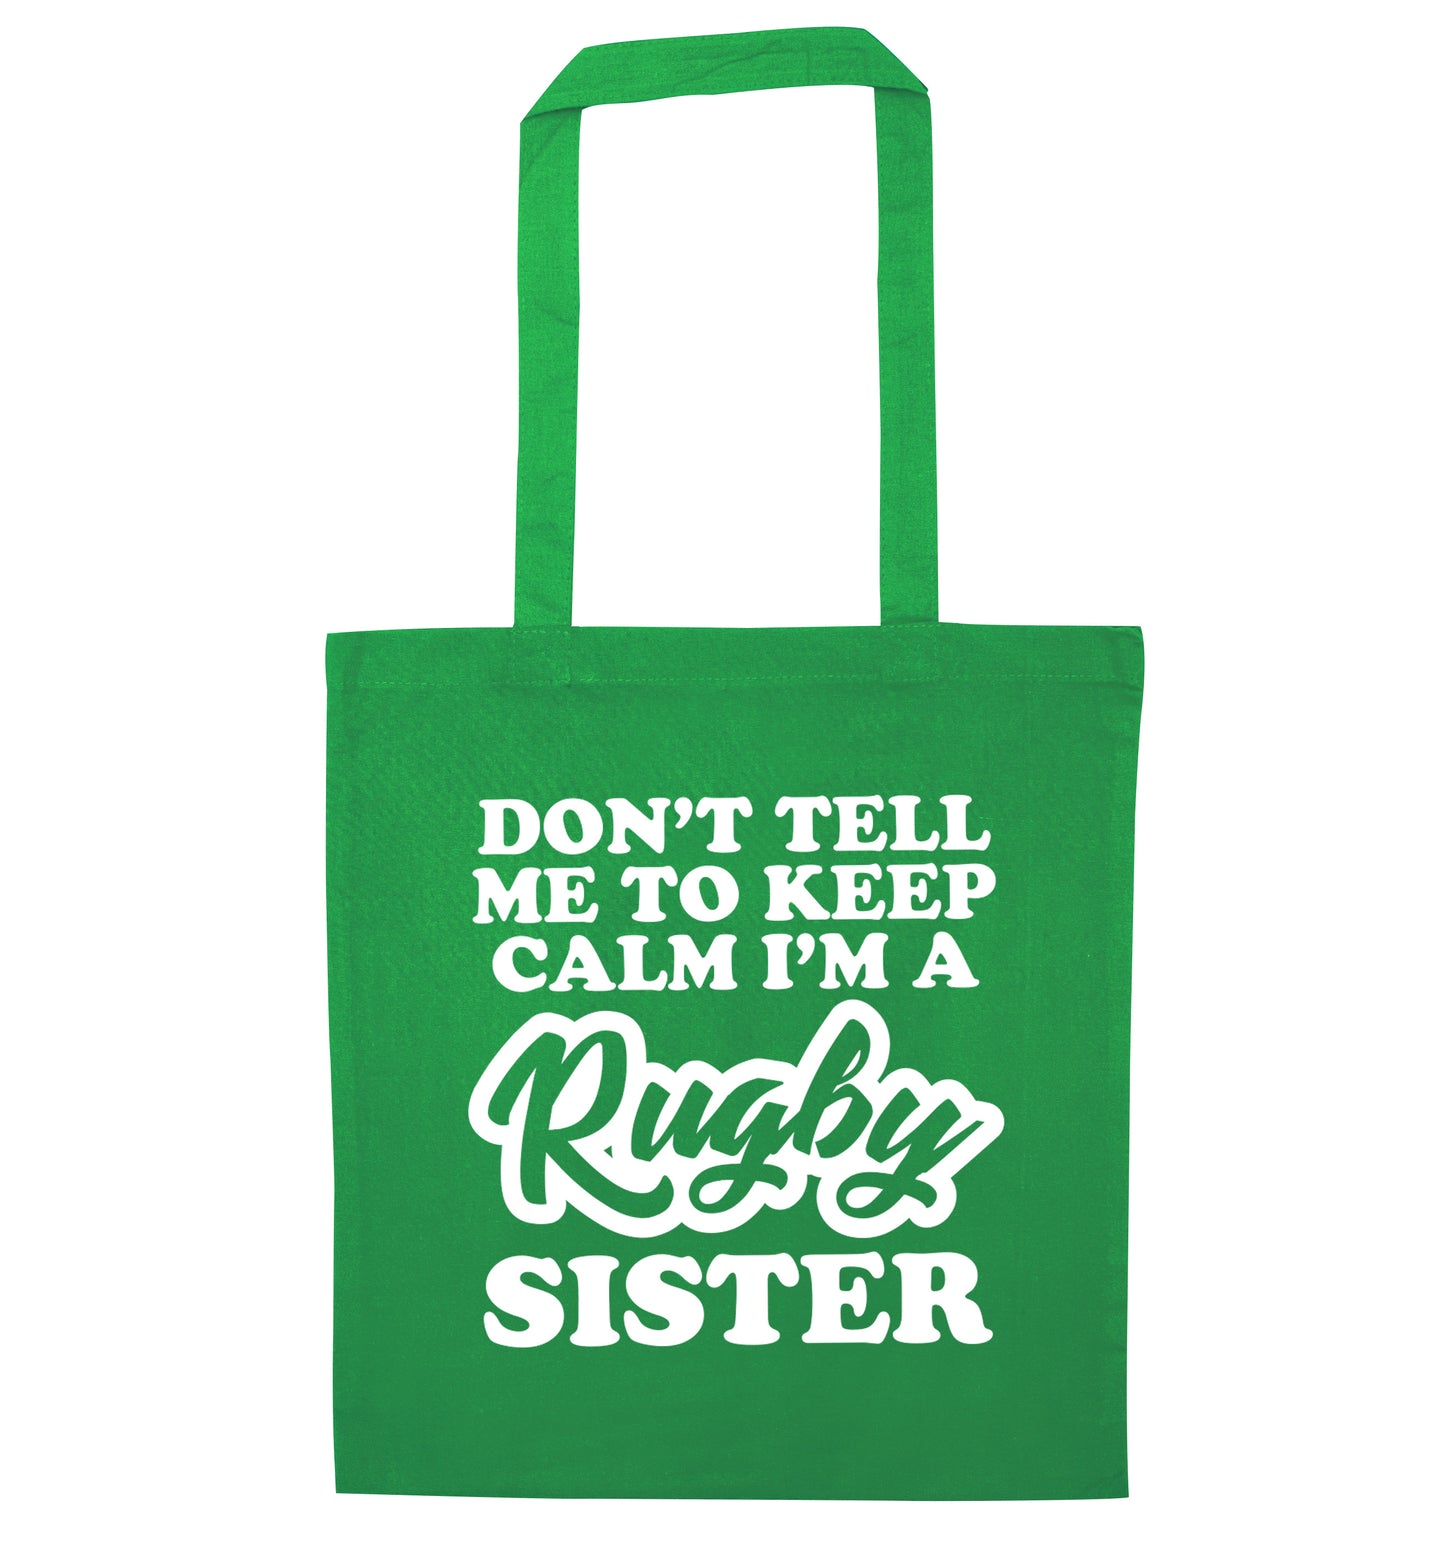 Don't tell me keep calm I'm a rugby sister green tote bag